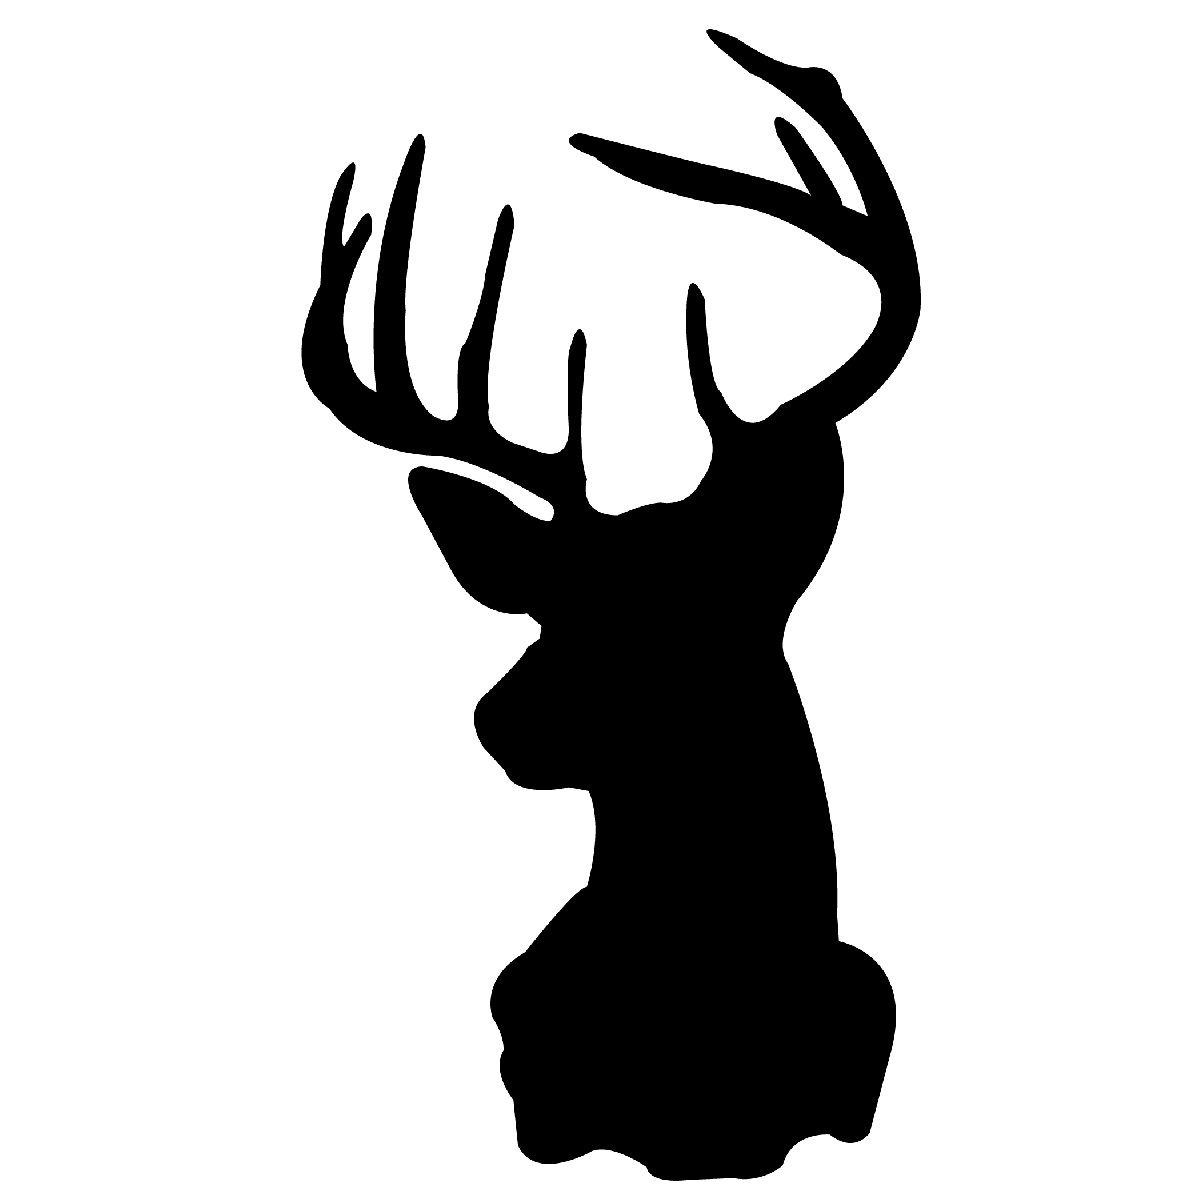 10 Deer Head Silhouette Vector Free Cliparts That You Can Download To